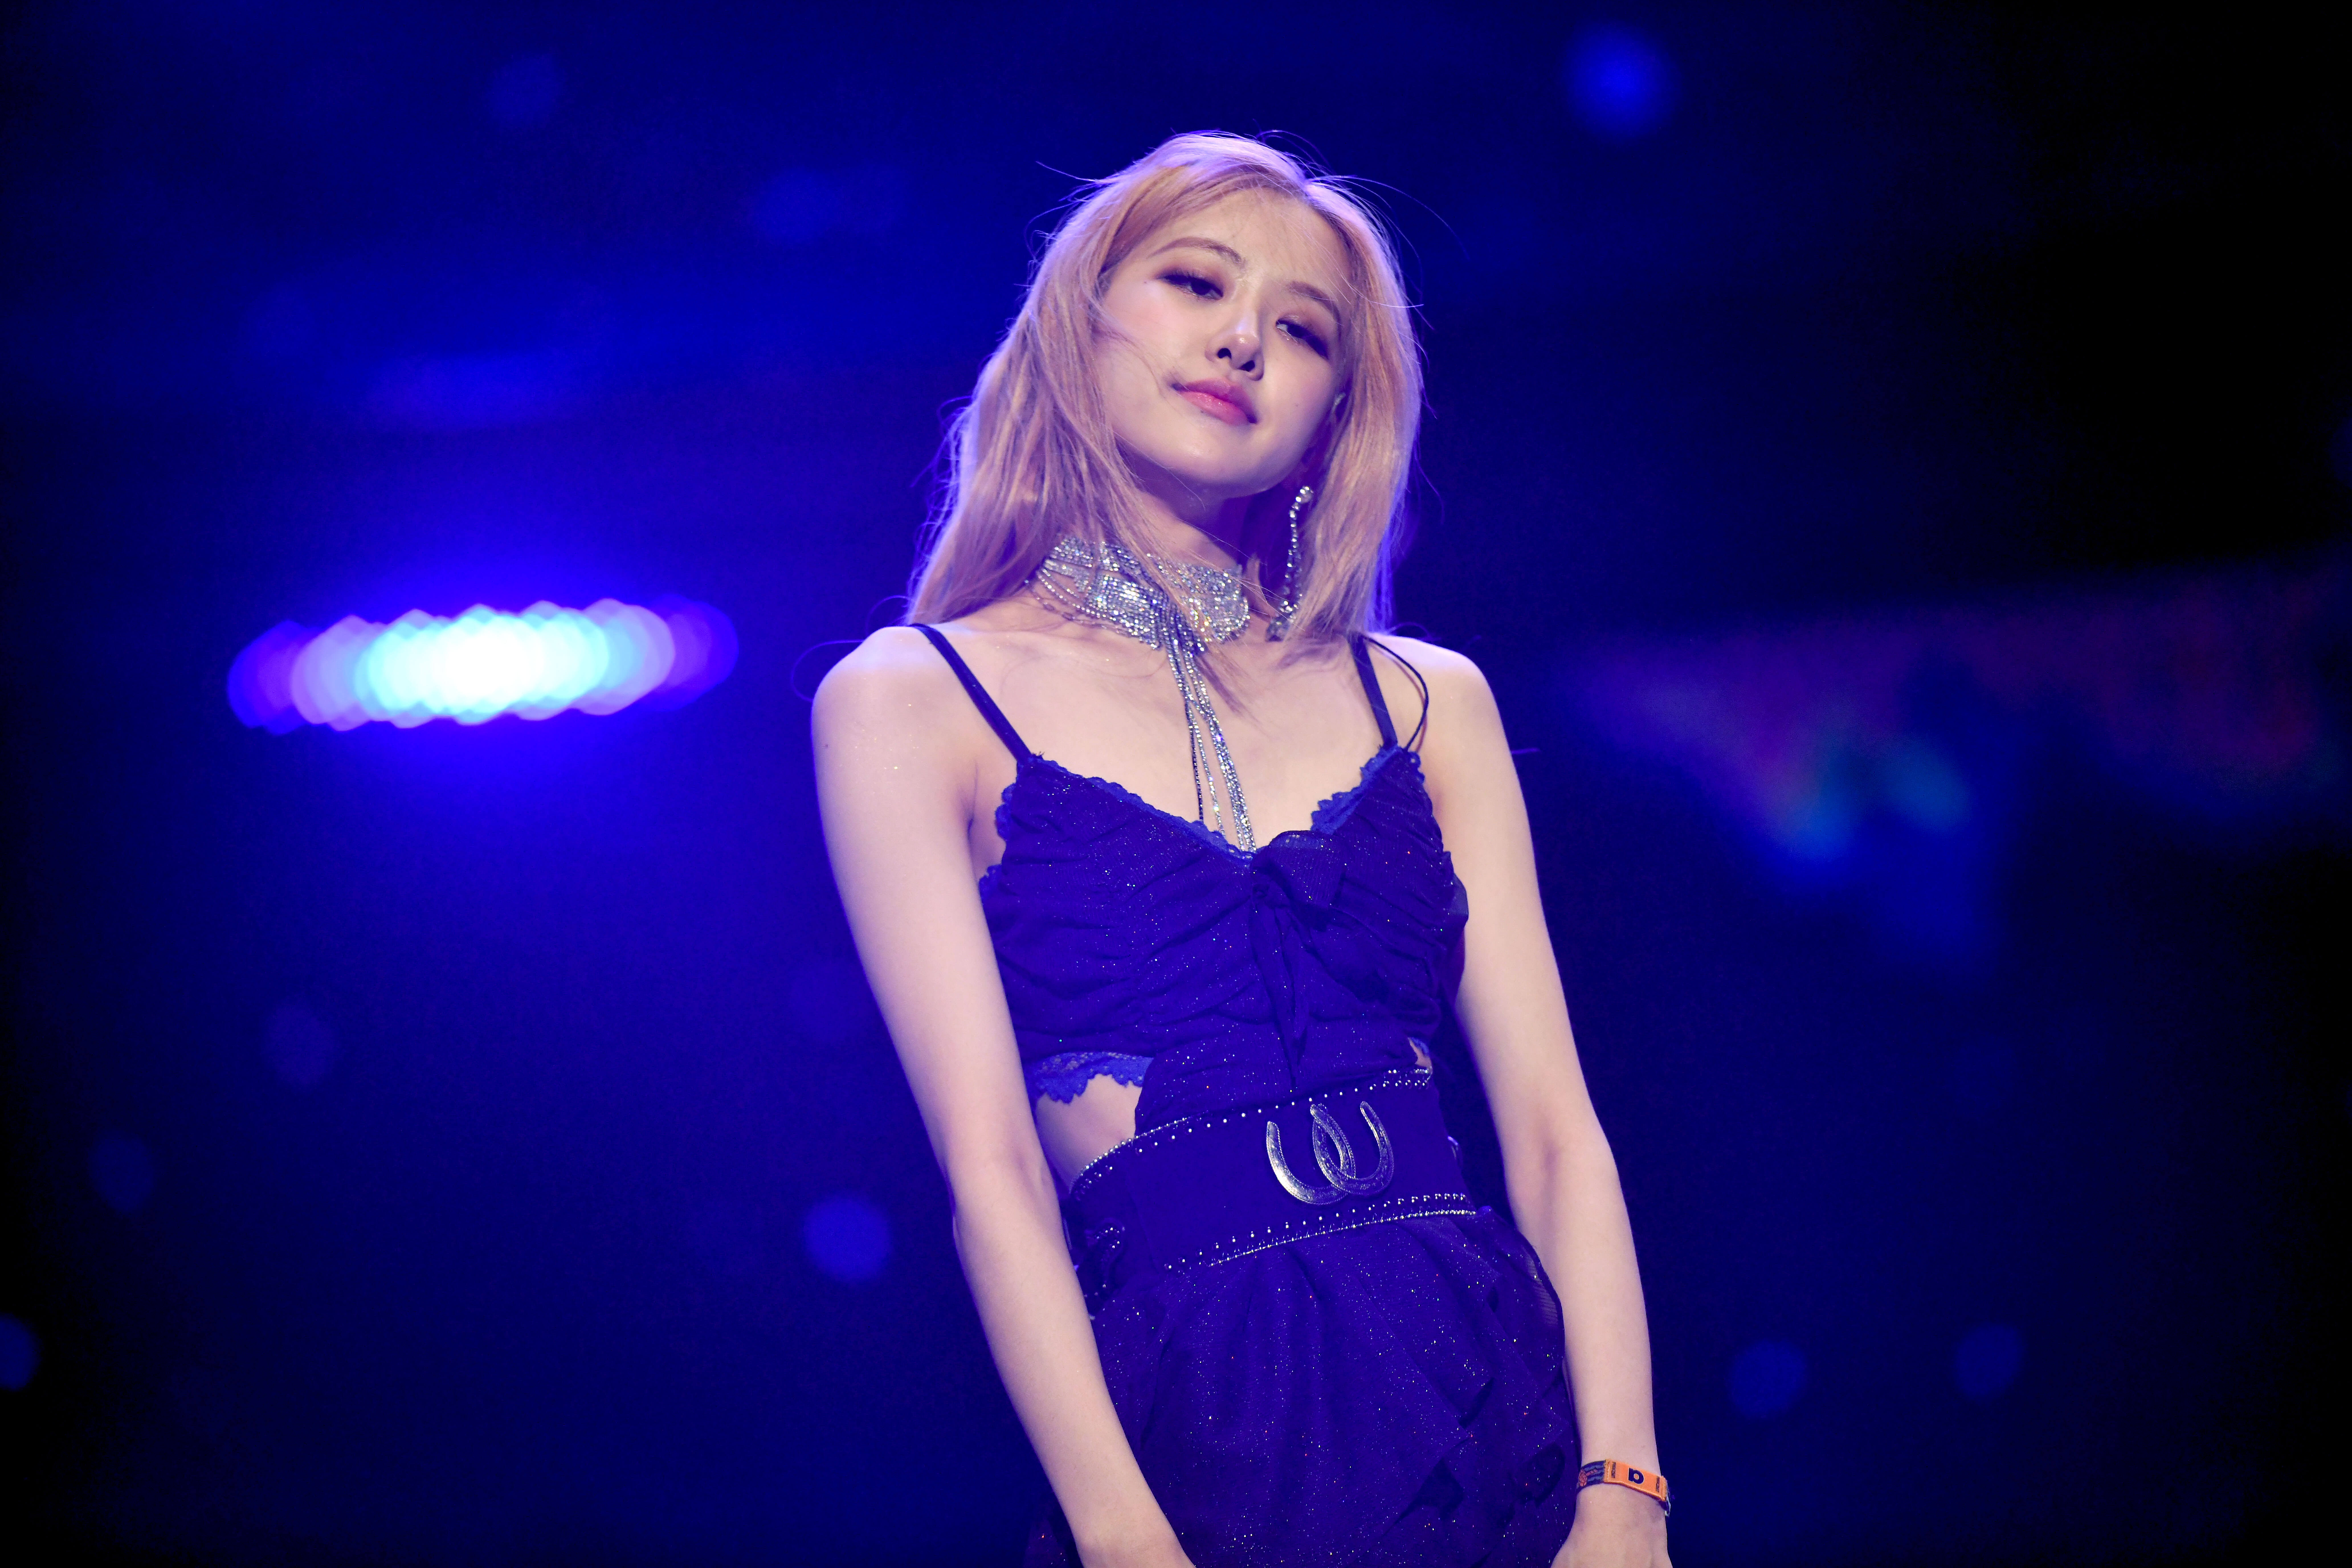 Rosé of BLACKPINK performs onstage during the 2019 Coachella Valley Music and Arts Festival